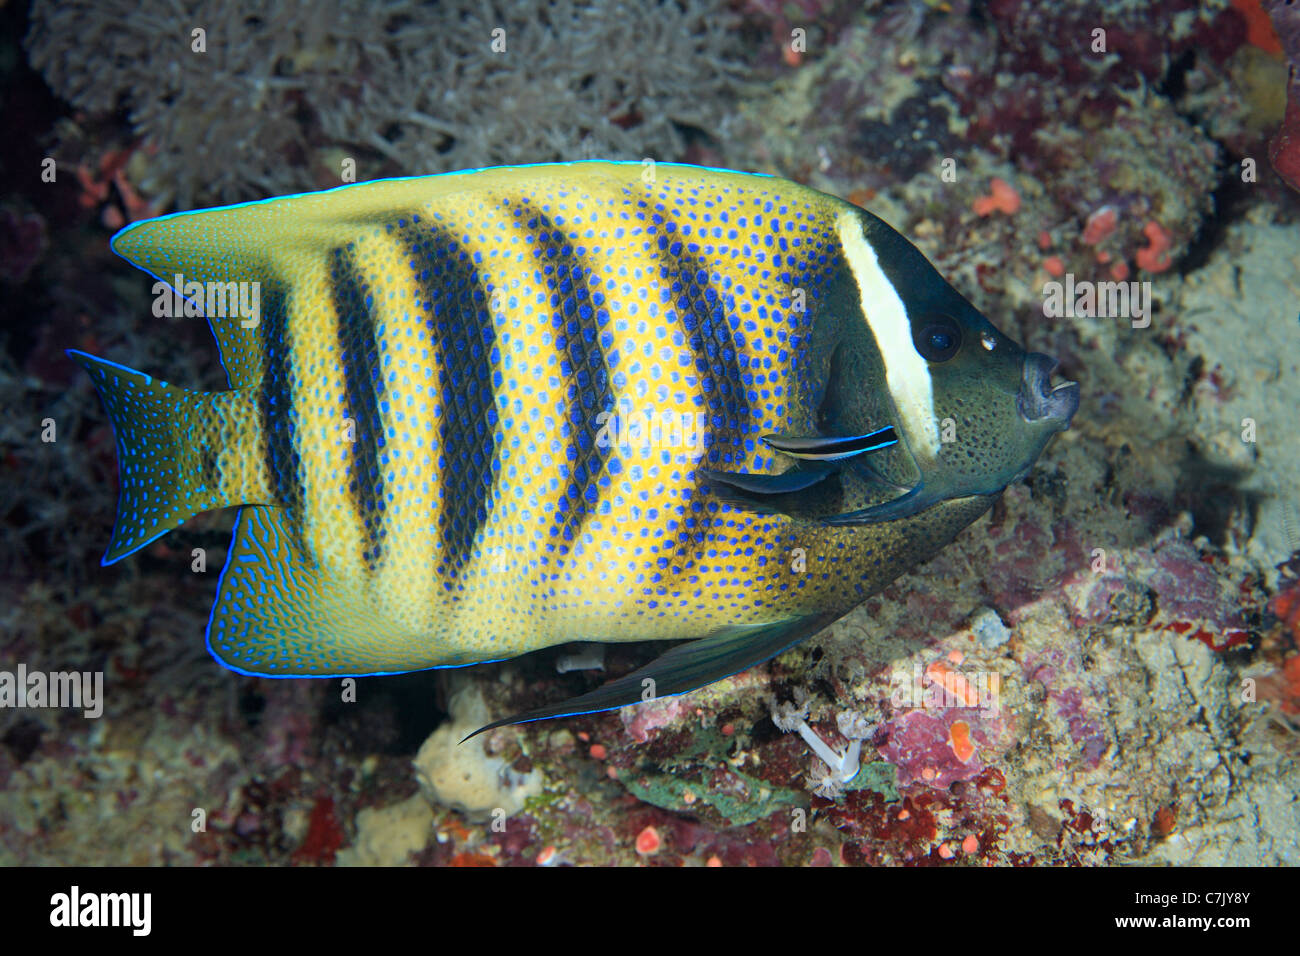 Six Banded Angelfish, Pomacanthus sexstriatus, being cleaned by a Bluestreak Cleaner Fish, or Cleaner Wrasse, Labroides dimidiatus. Stock Photo